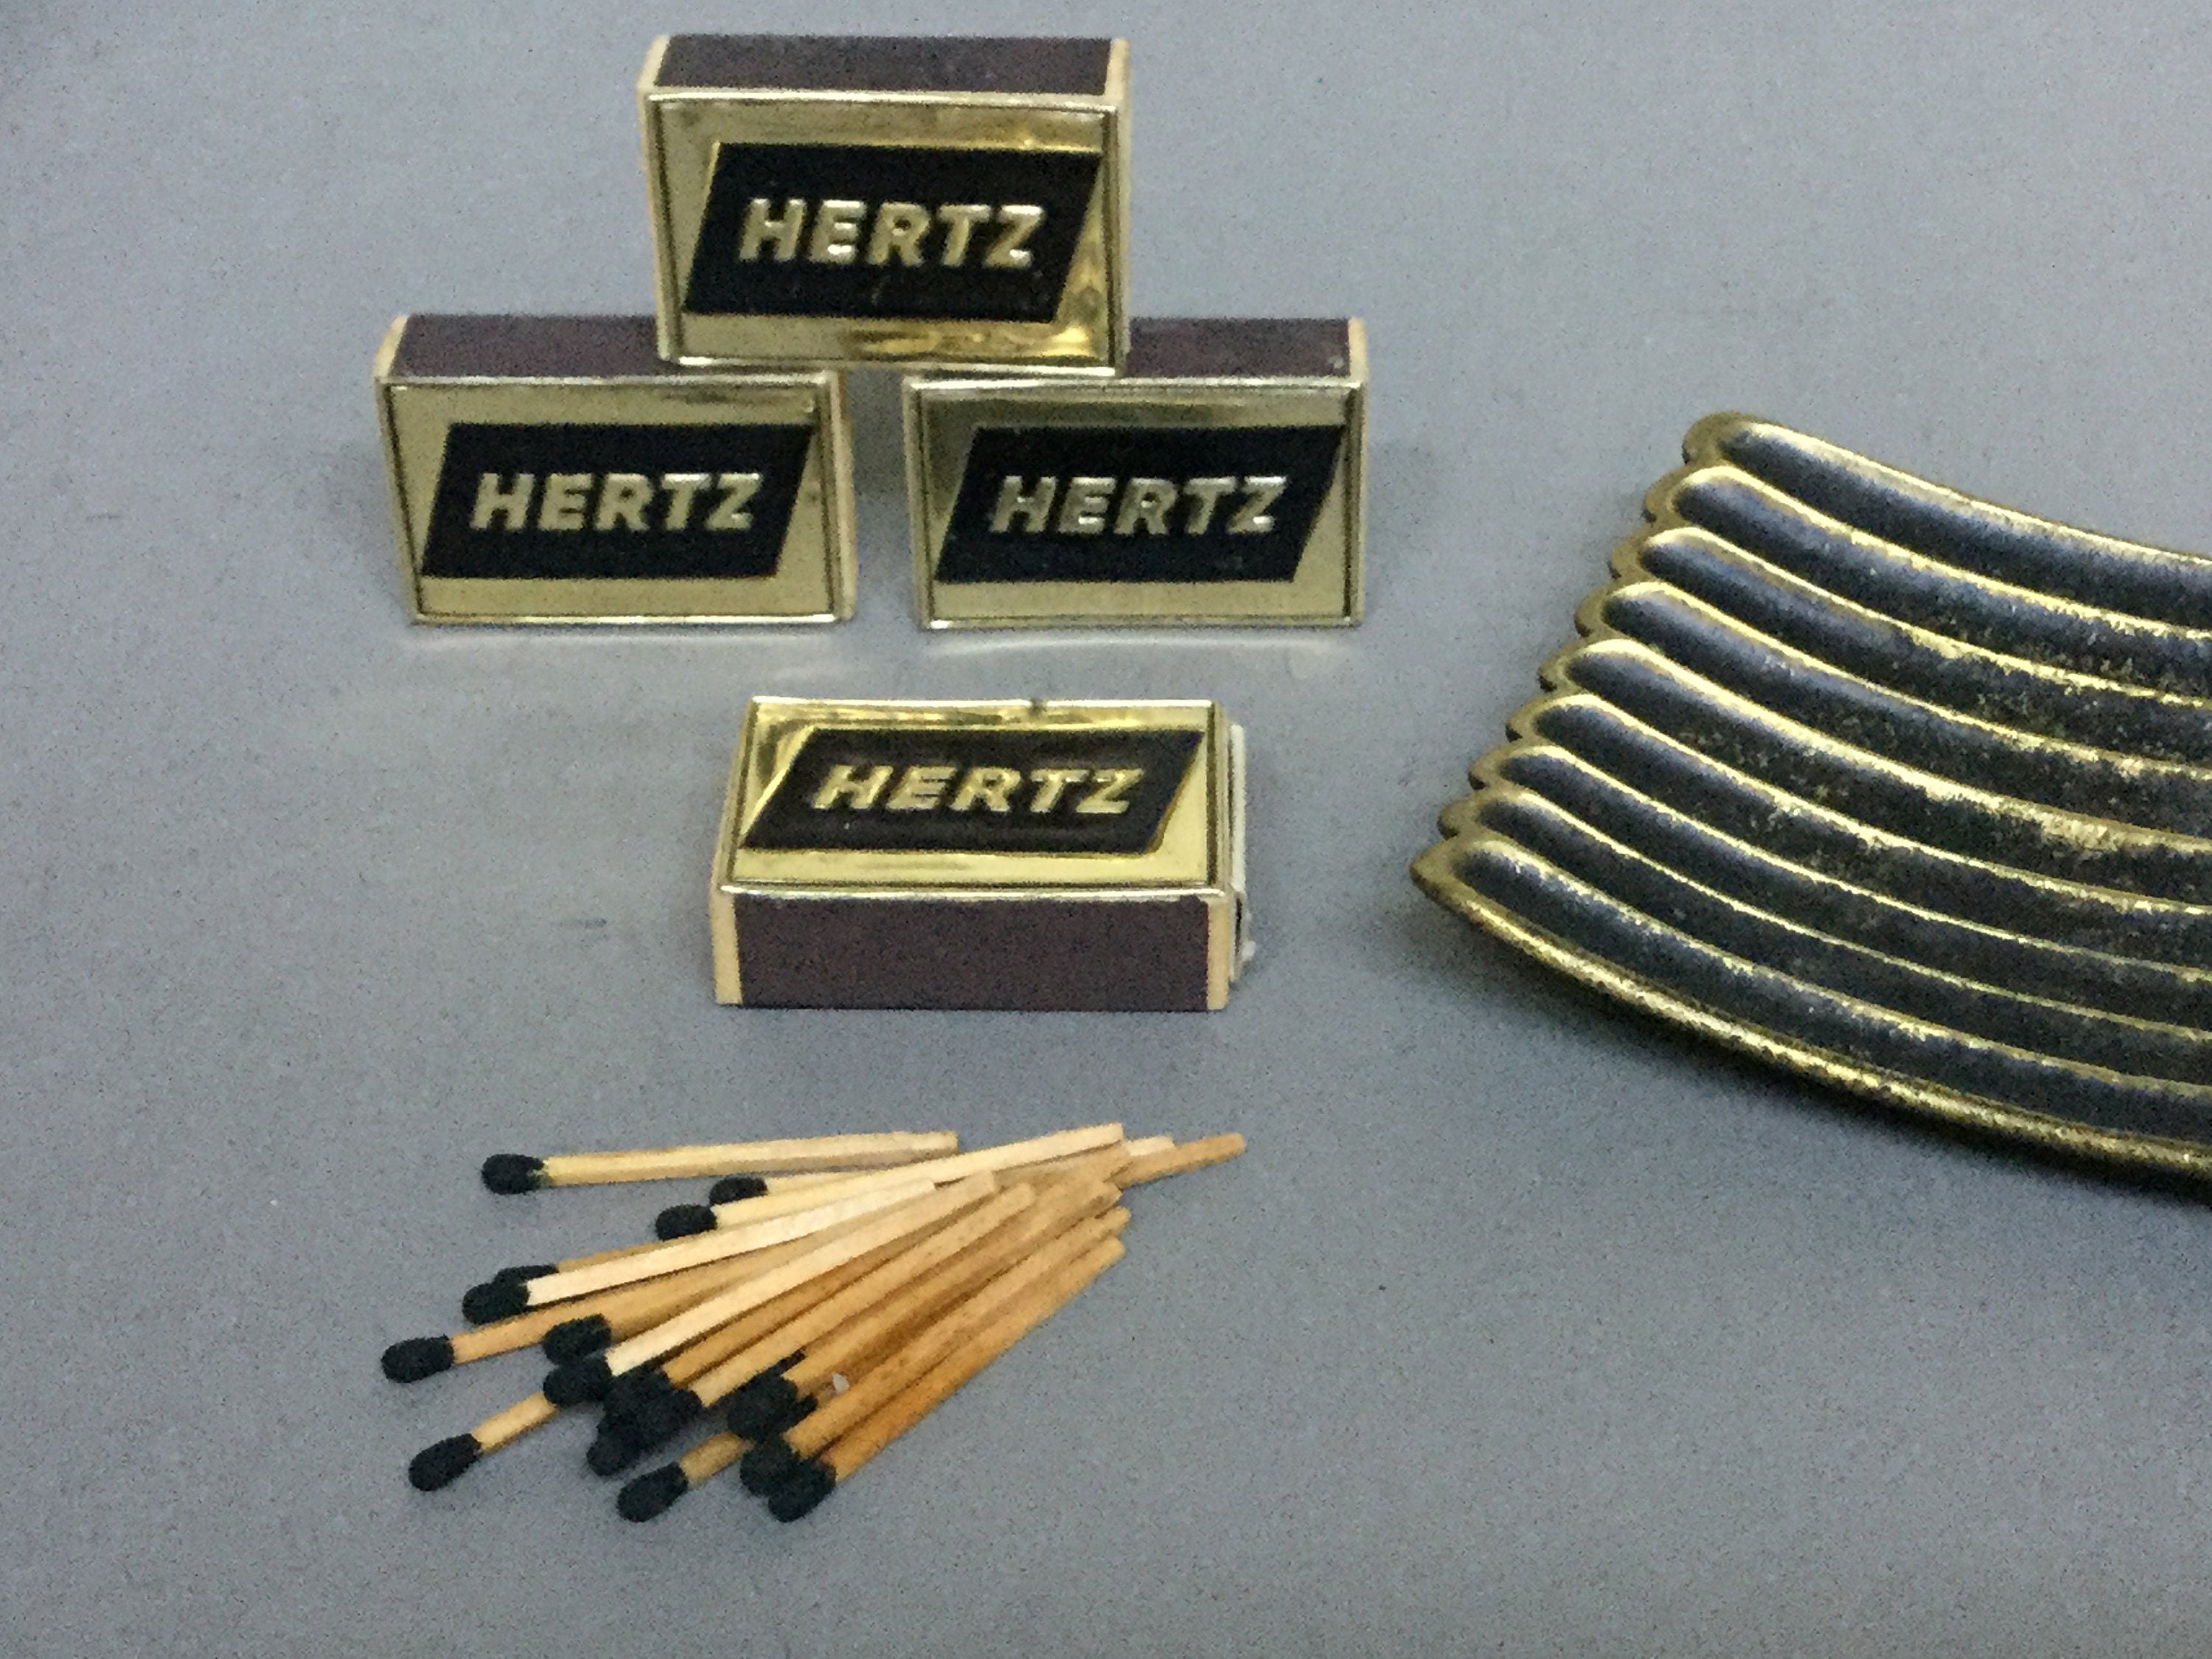 4 Vintage Hertz Matchboxes With Wood Matches / Vintage Matches 